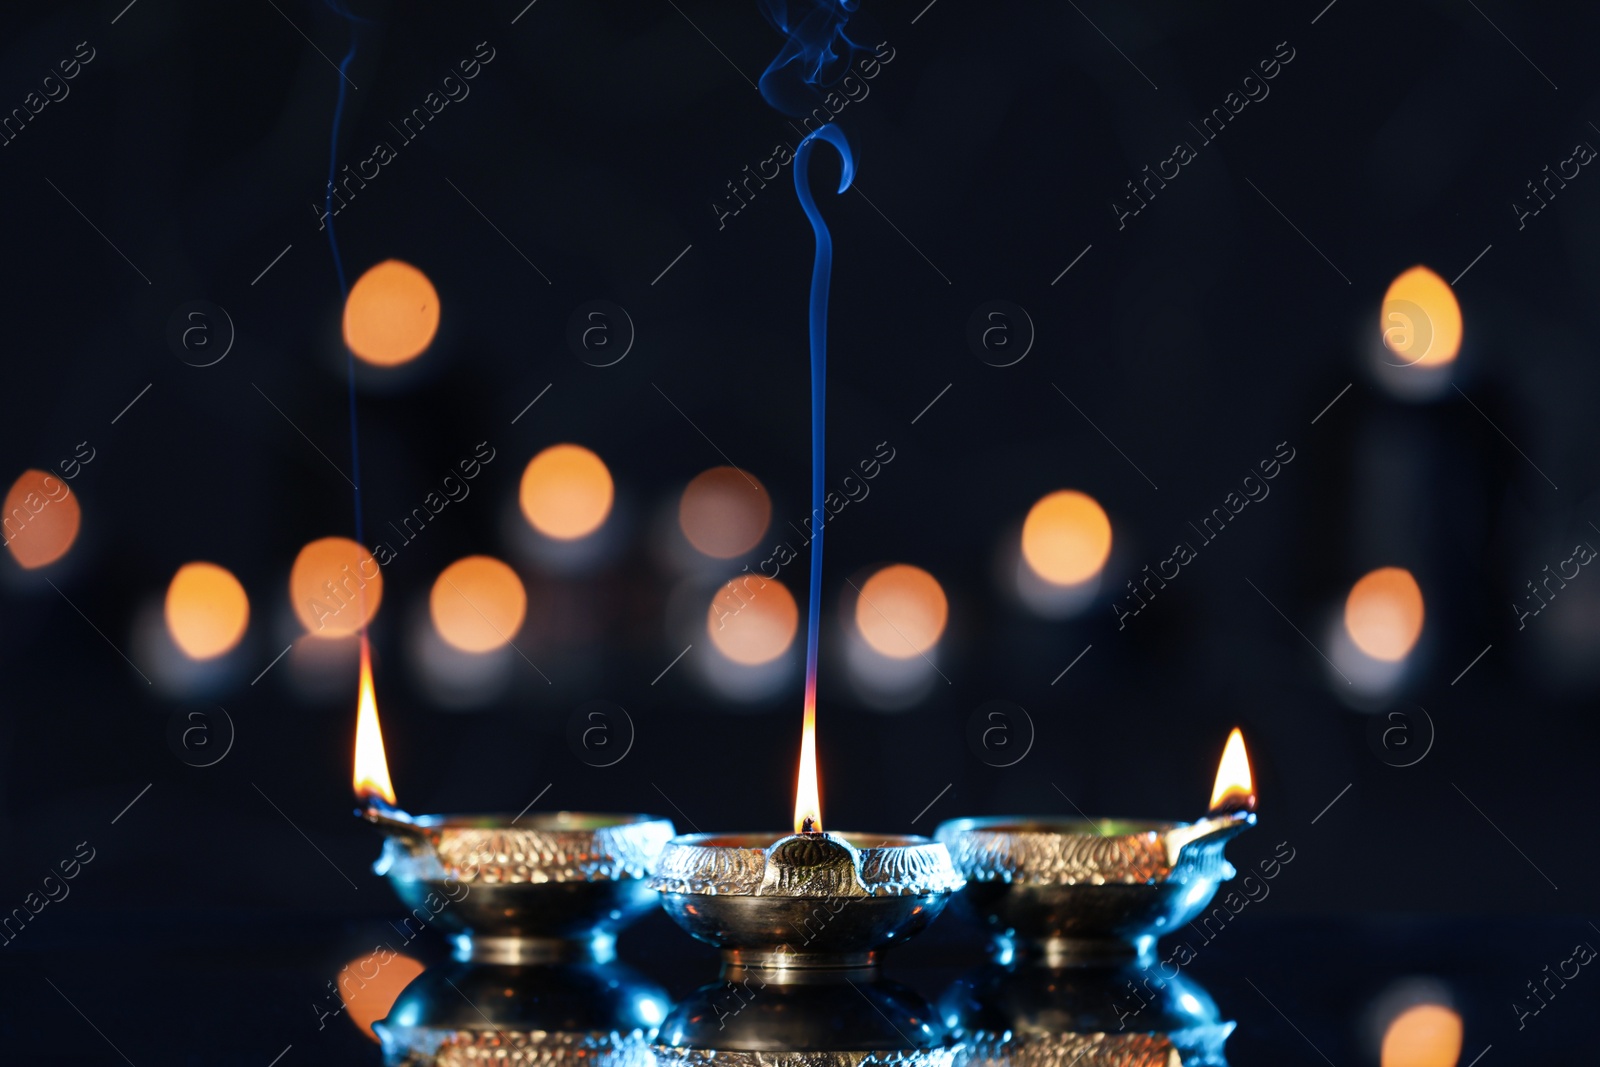 Photo of Lit diyas on table against blurred lights. Diwali lamps